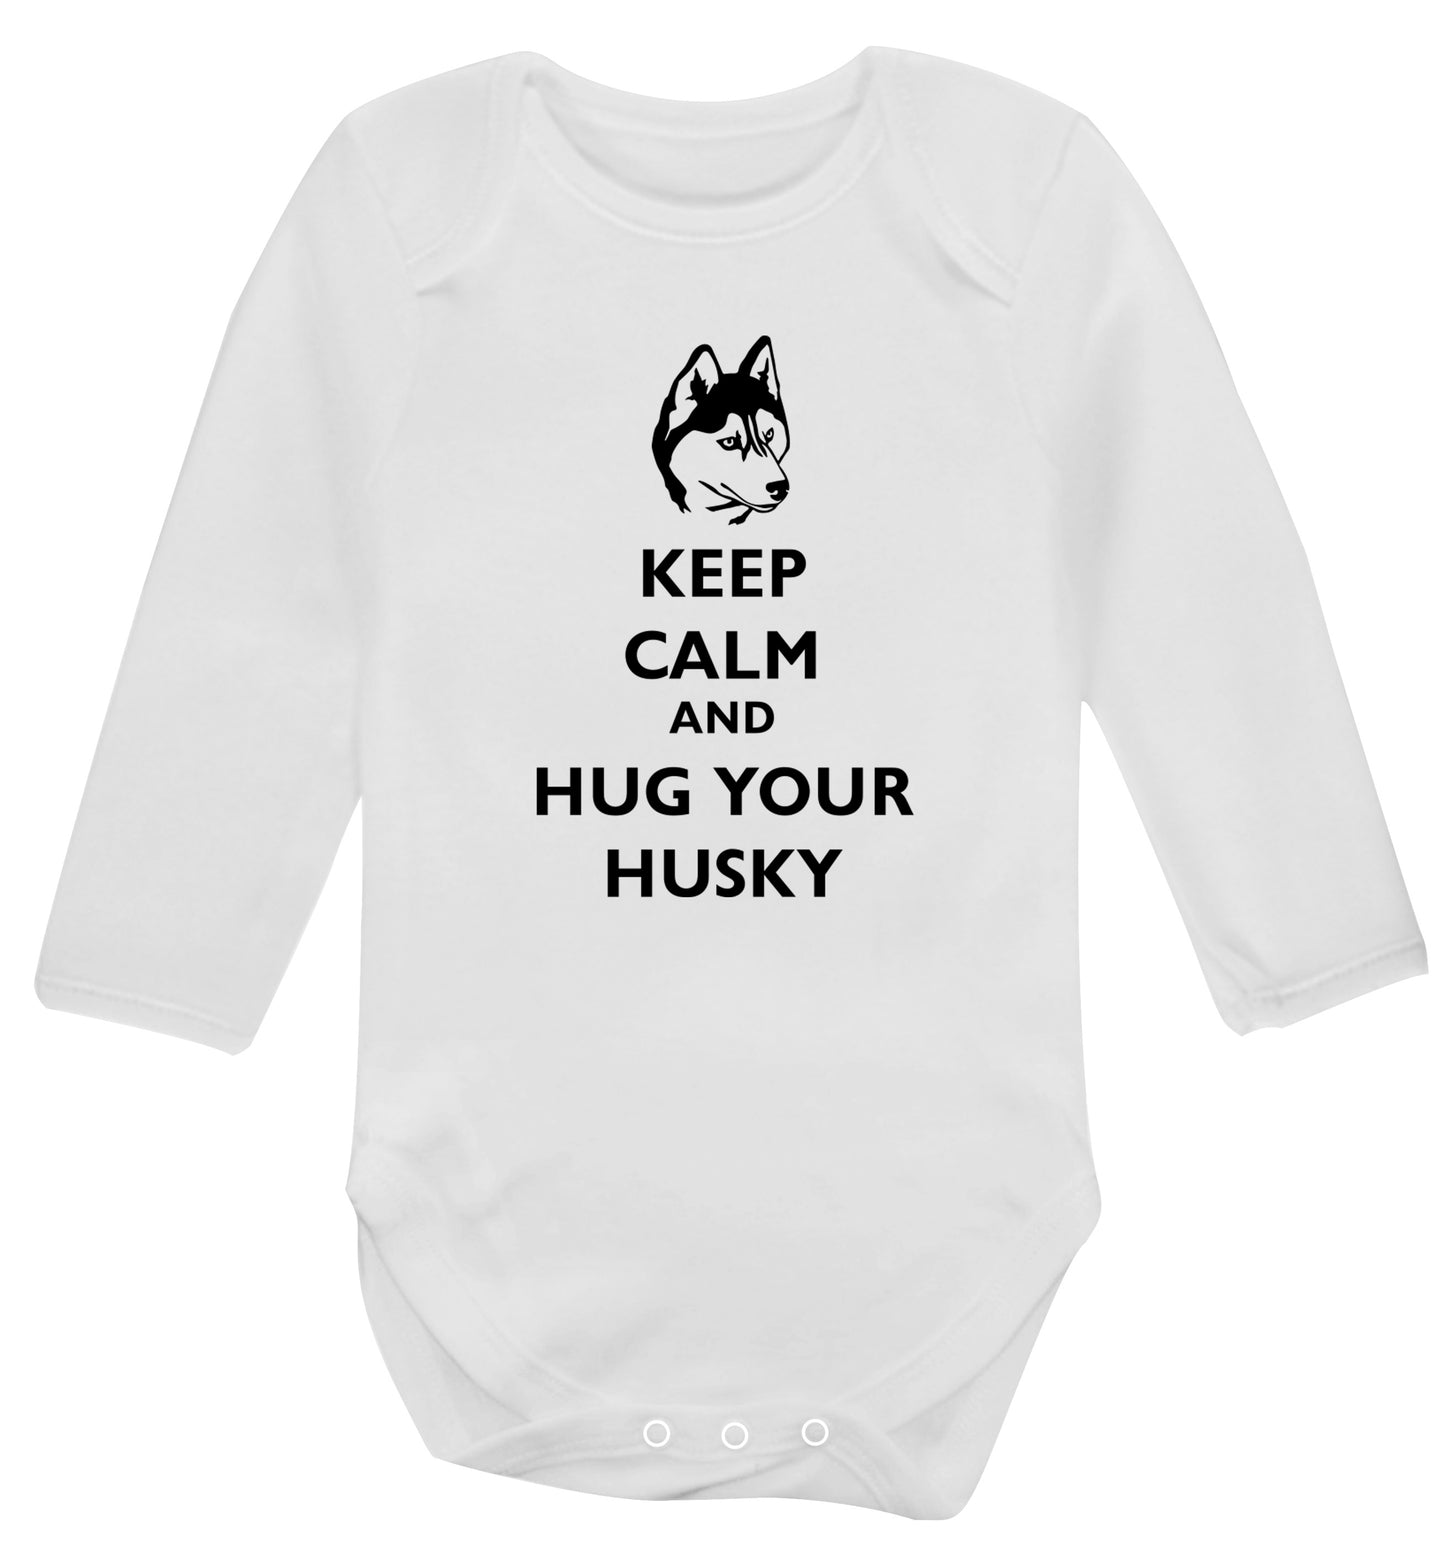 Keep calm and hug your husky Baby Vest long sleeved white 6-12 months